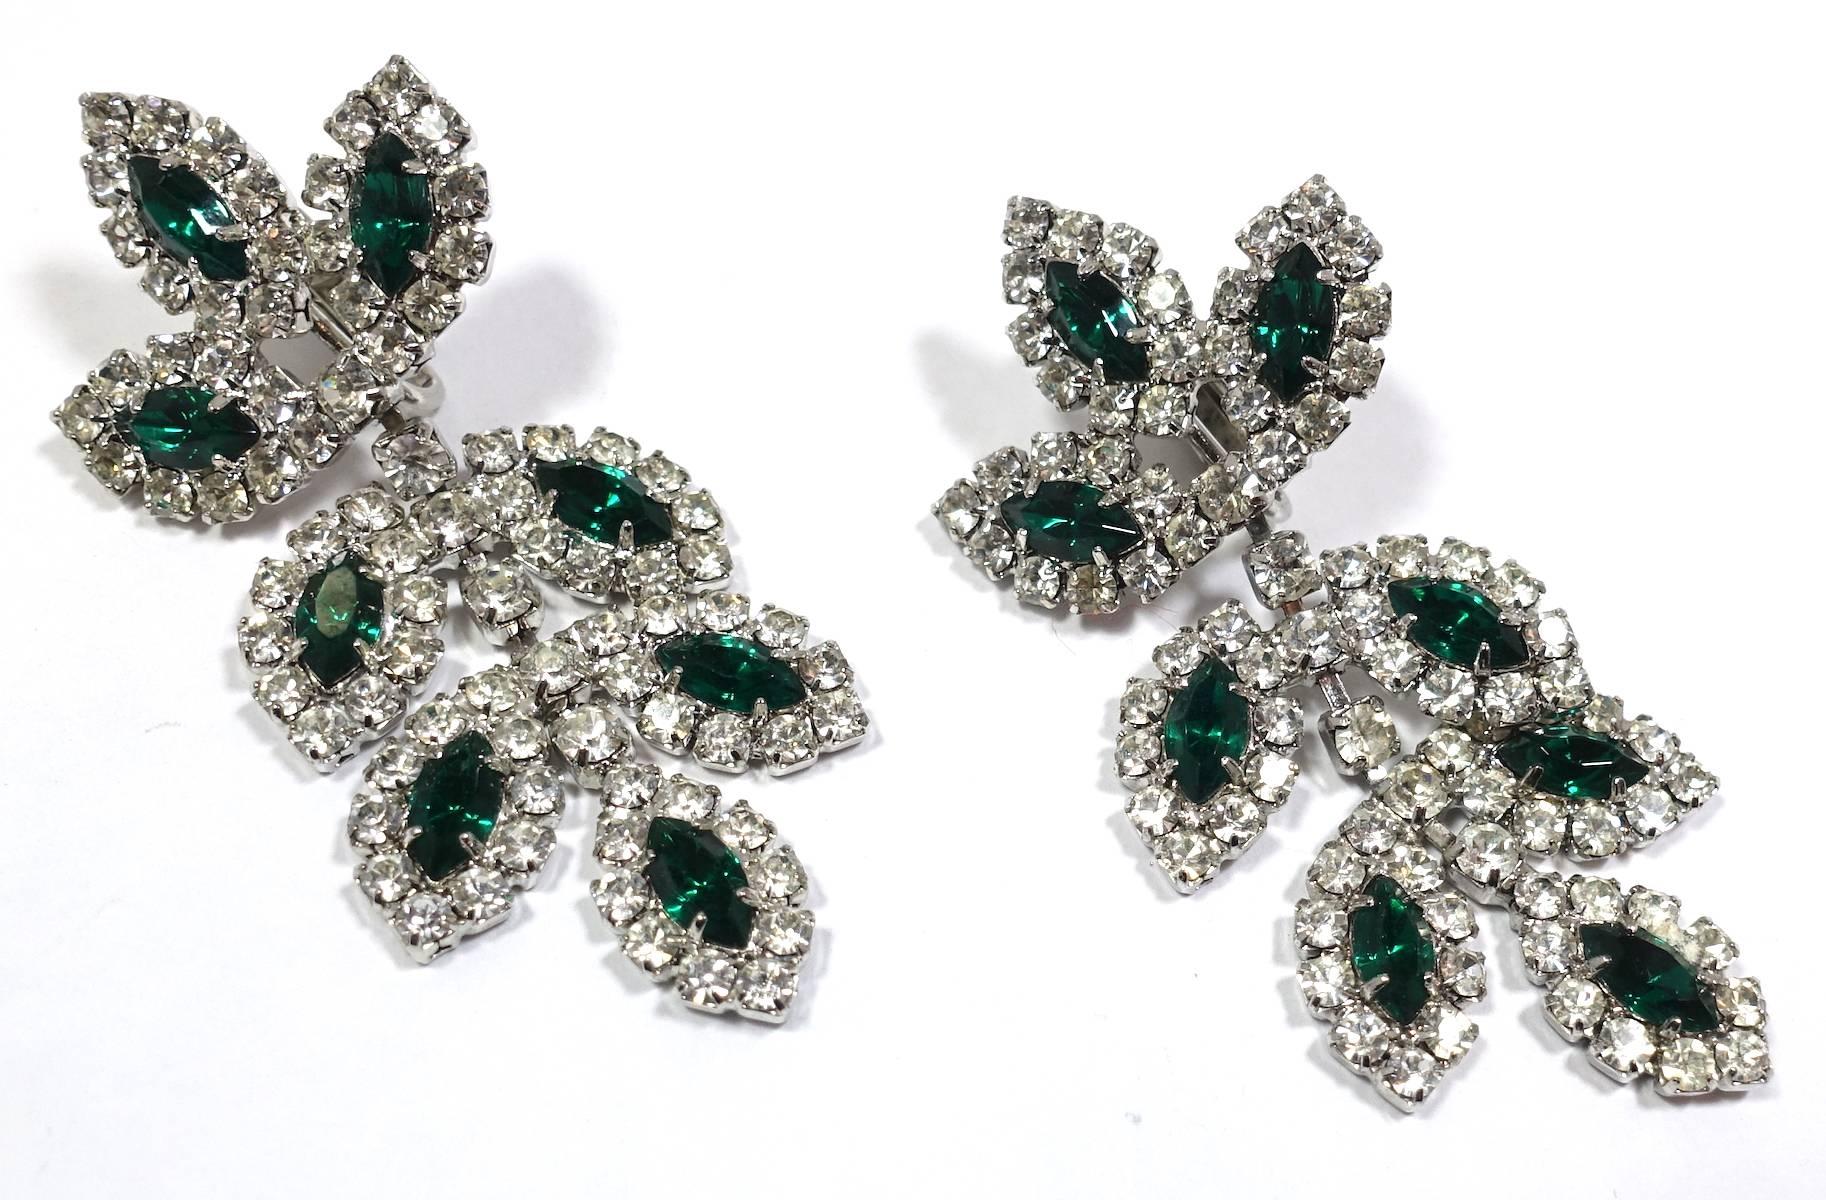 These Kenneth Lane clip earrings amazingly match the green and clear Les Bernard crystal necklace.  They feature green and clear crystals in a silver tone setting.  These earrings measure 2-1/2” x 1” and are signed “Kenneth Lane”. They are in